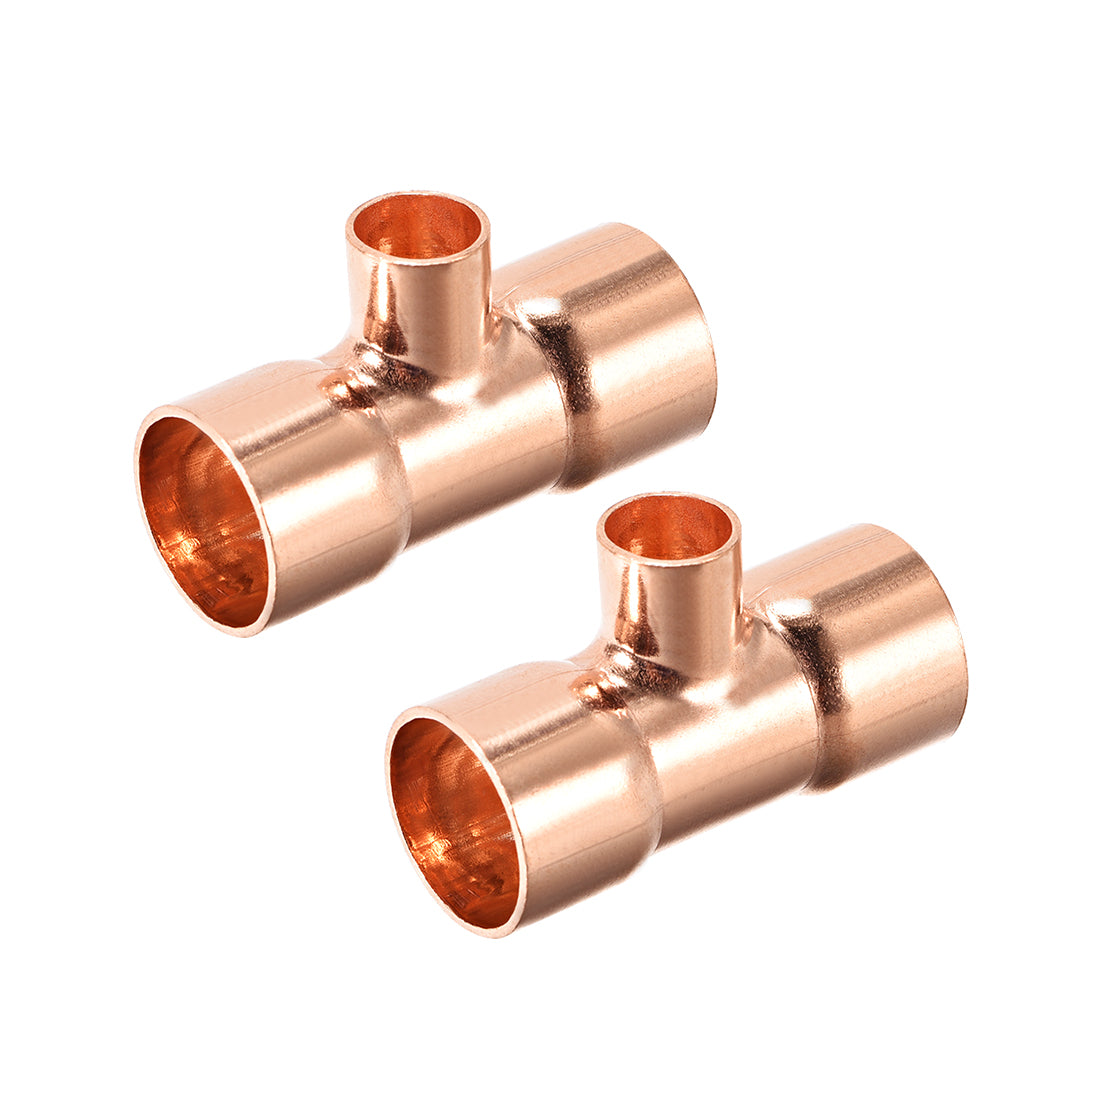 uxcell Uxcell 3/4-inch x 3/8-inch x 3/4-inch Copper Reducing Tee Copper Pressure Pipe Fitting Conector  for Plumbing Supply and Refrigeration 2pcs